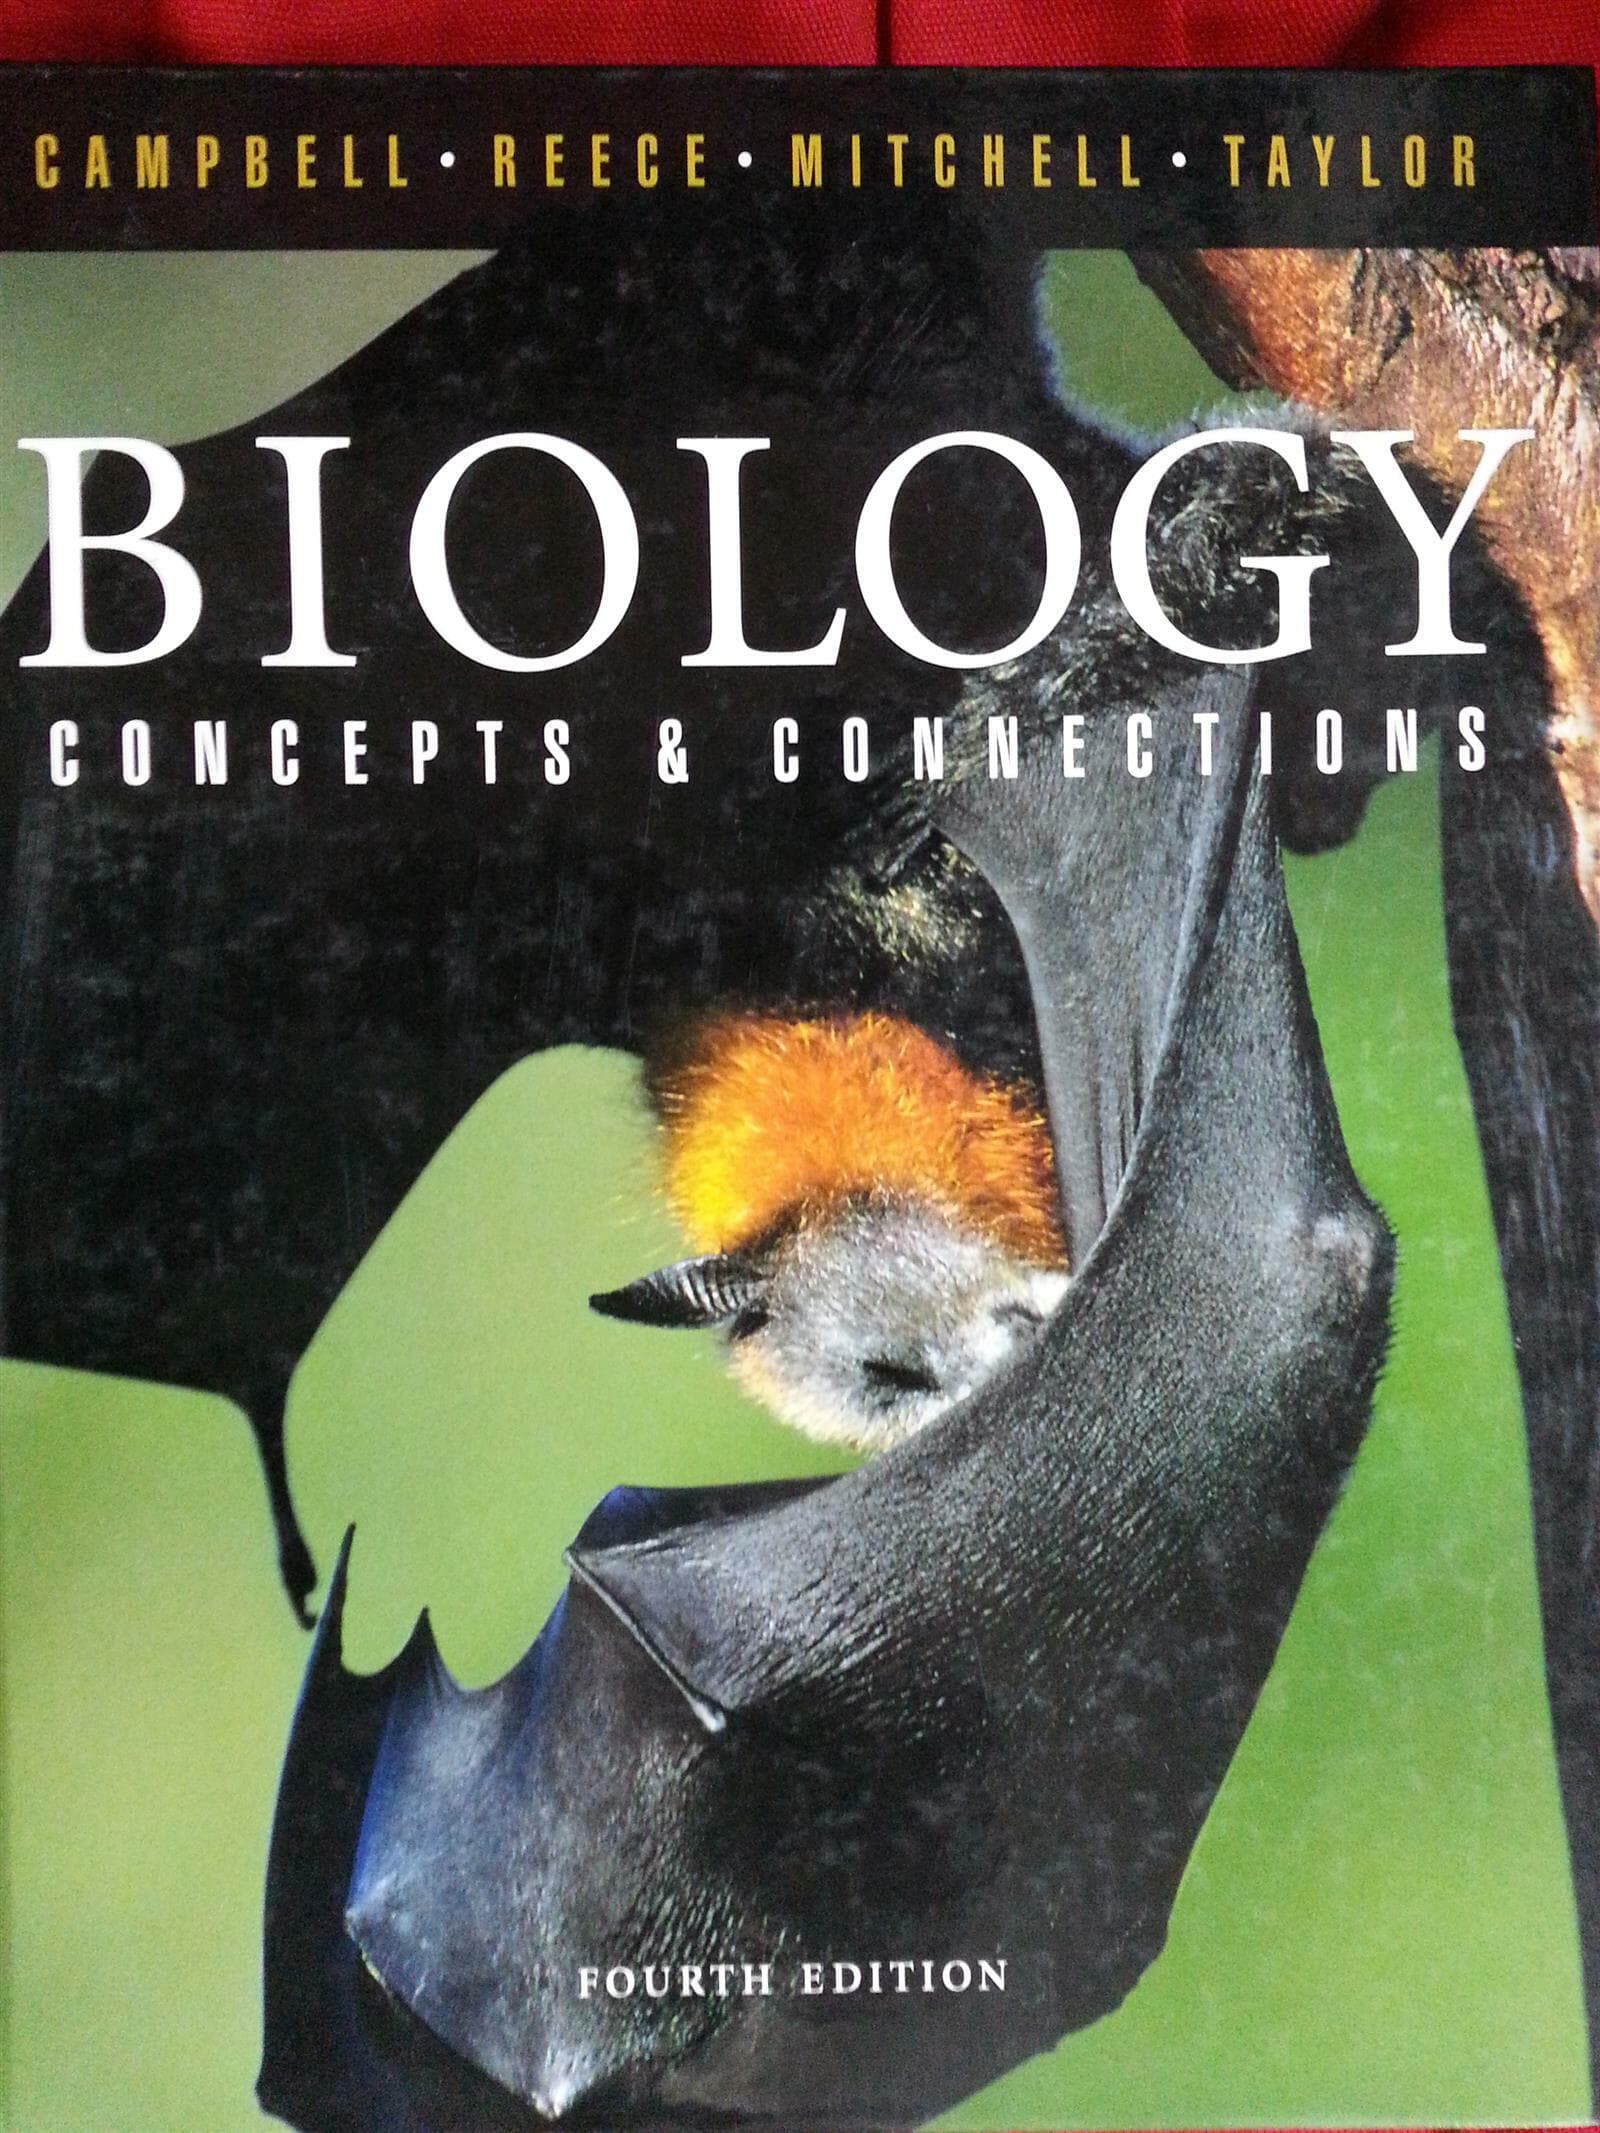 Biology: Concepts and Connections (양장,4판) - 상하단 검은색있음